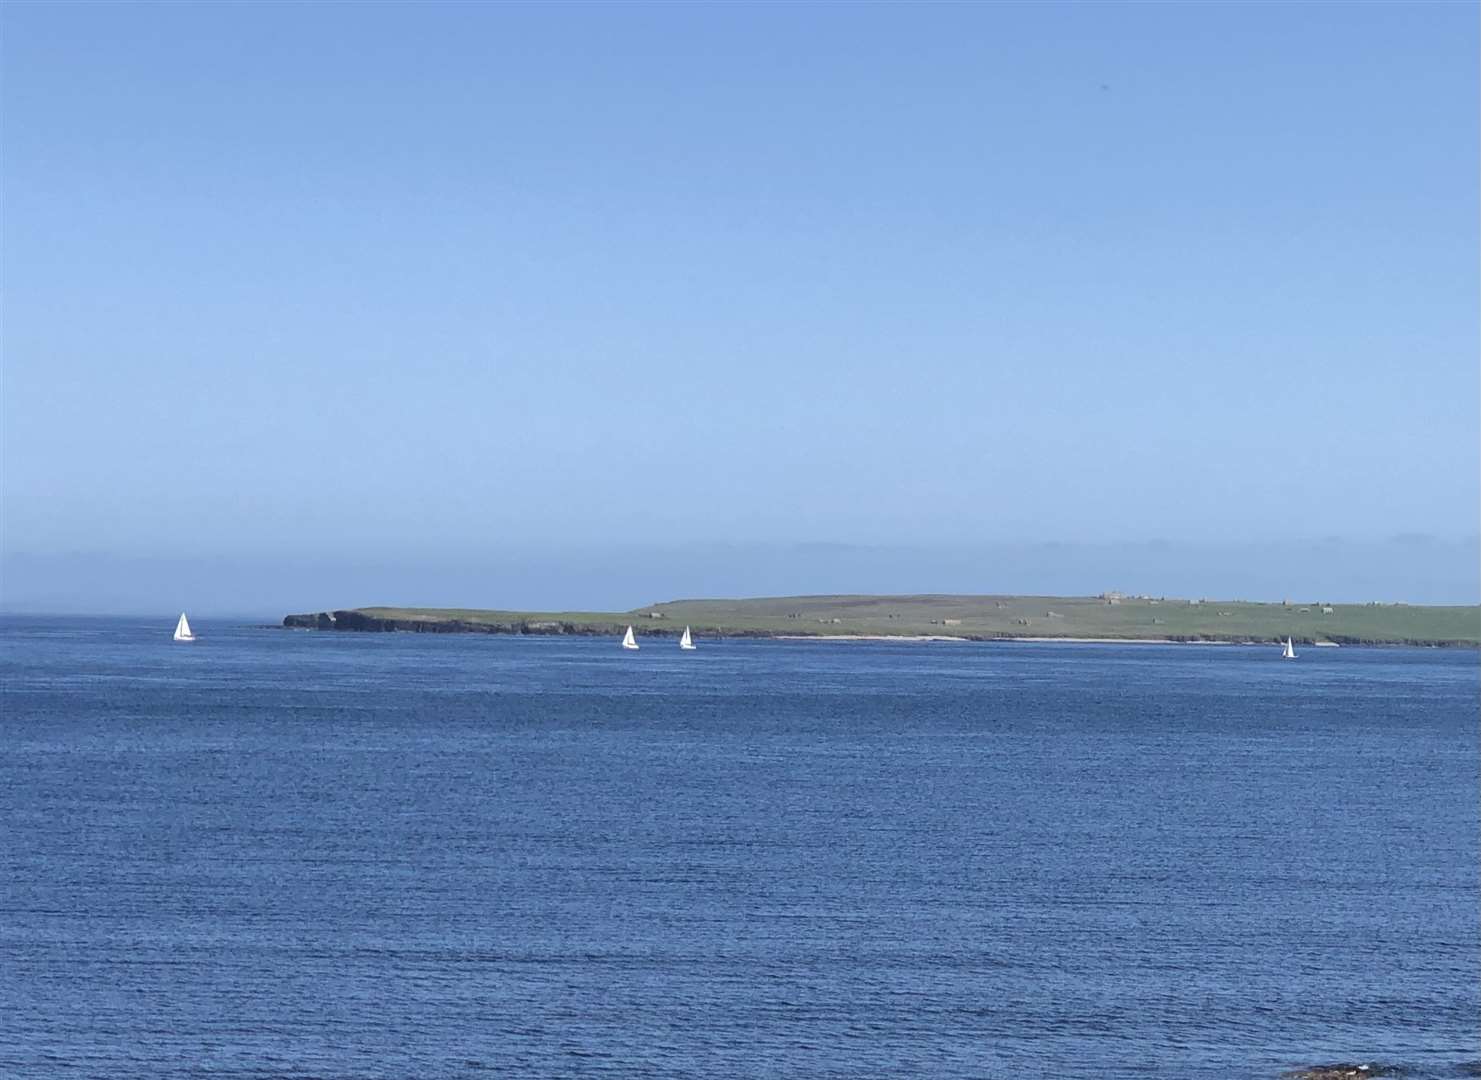 Lyall Rennie took this photograph of a flotilla of yachts passing through the Pentland Firth with Stroma in the background. 'Totally blue skies and sea, a rare thing in Caithness,' he said!